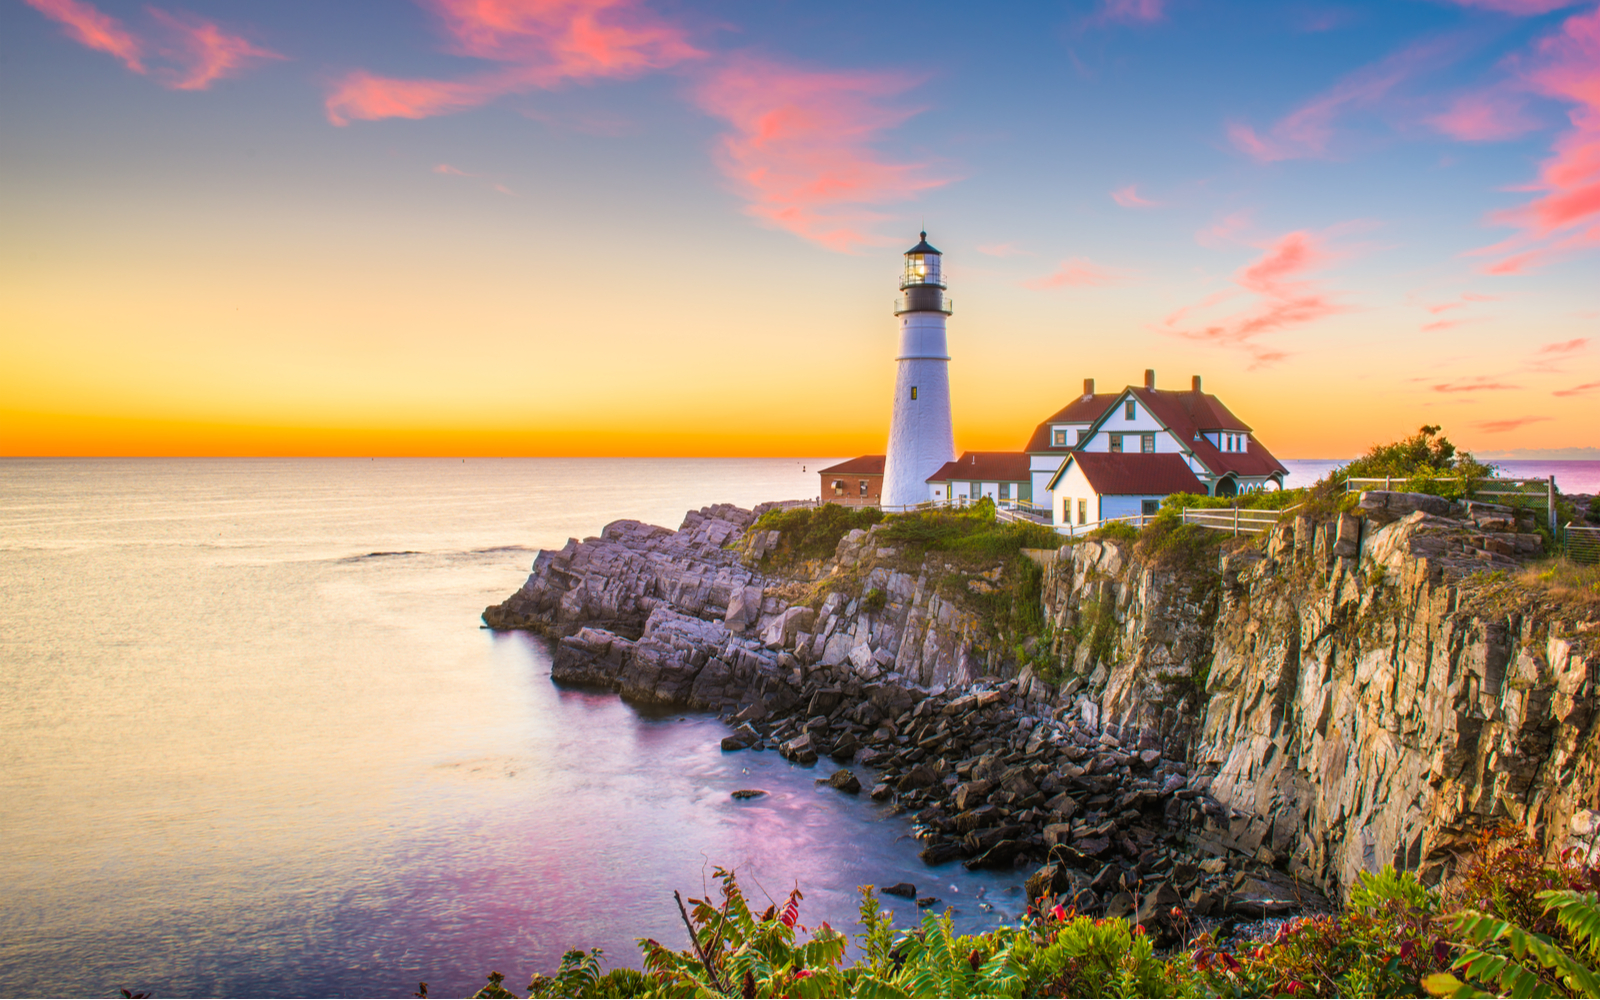 Cape Elizabeth lighthouse, one of the best places to visit in New England